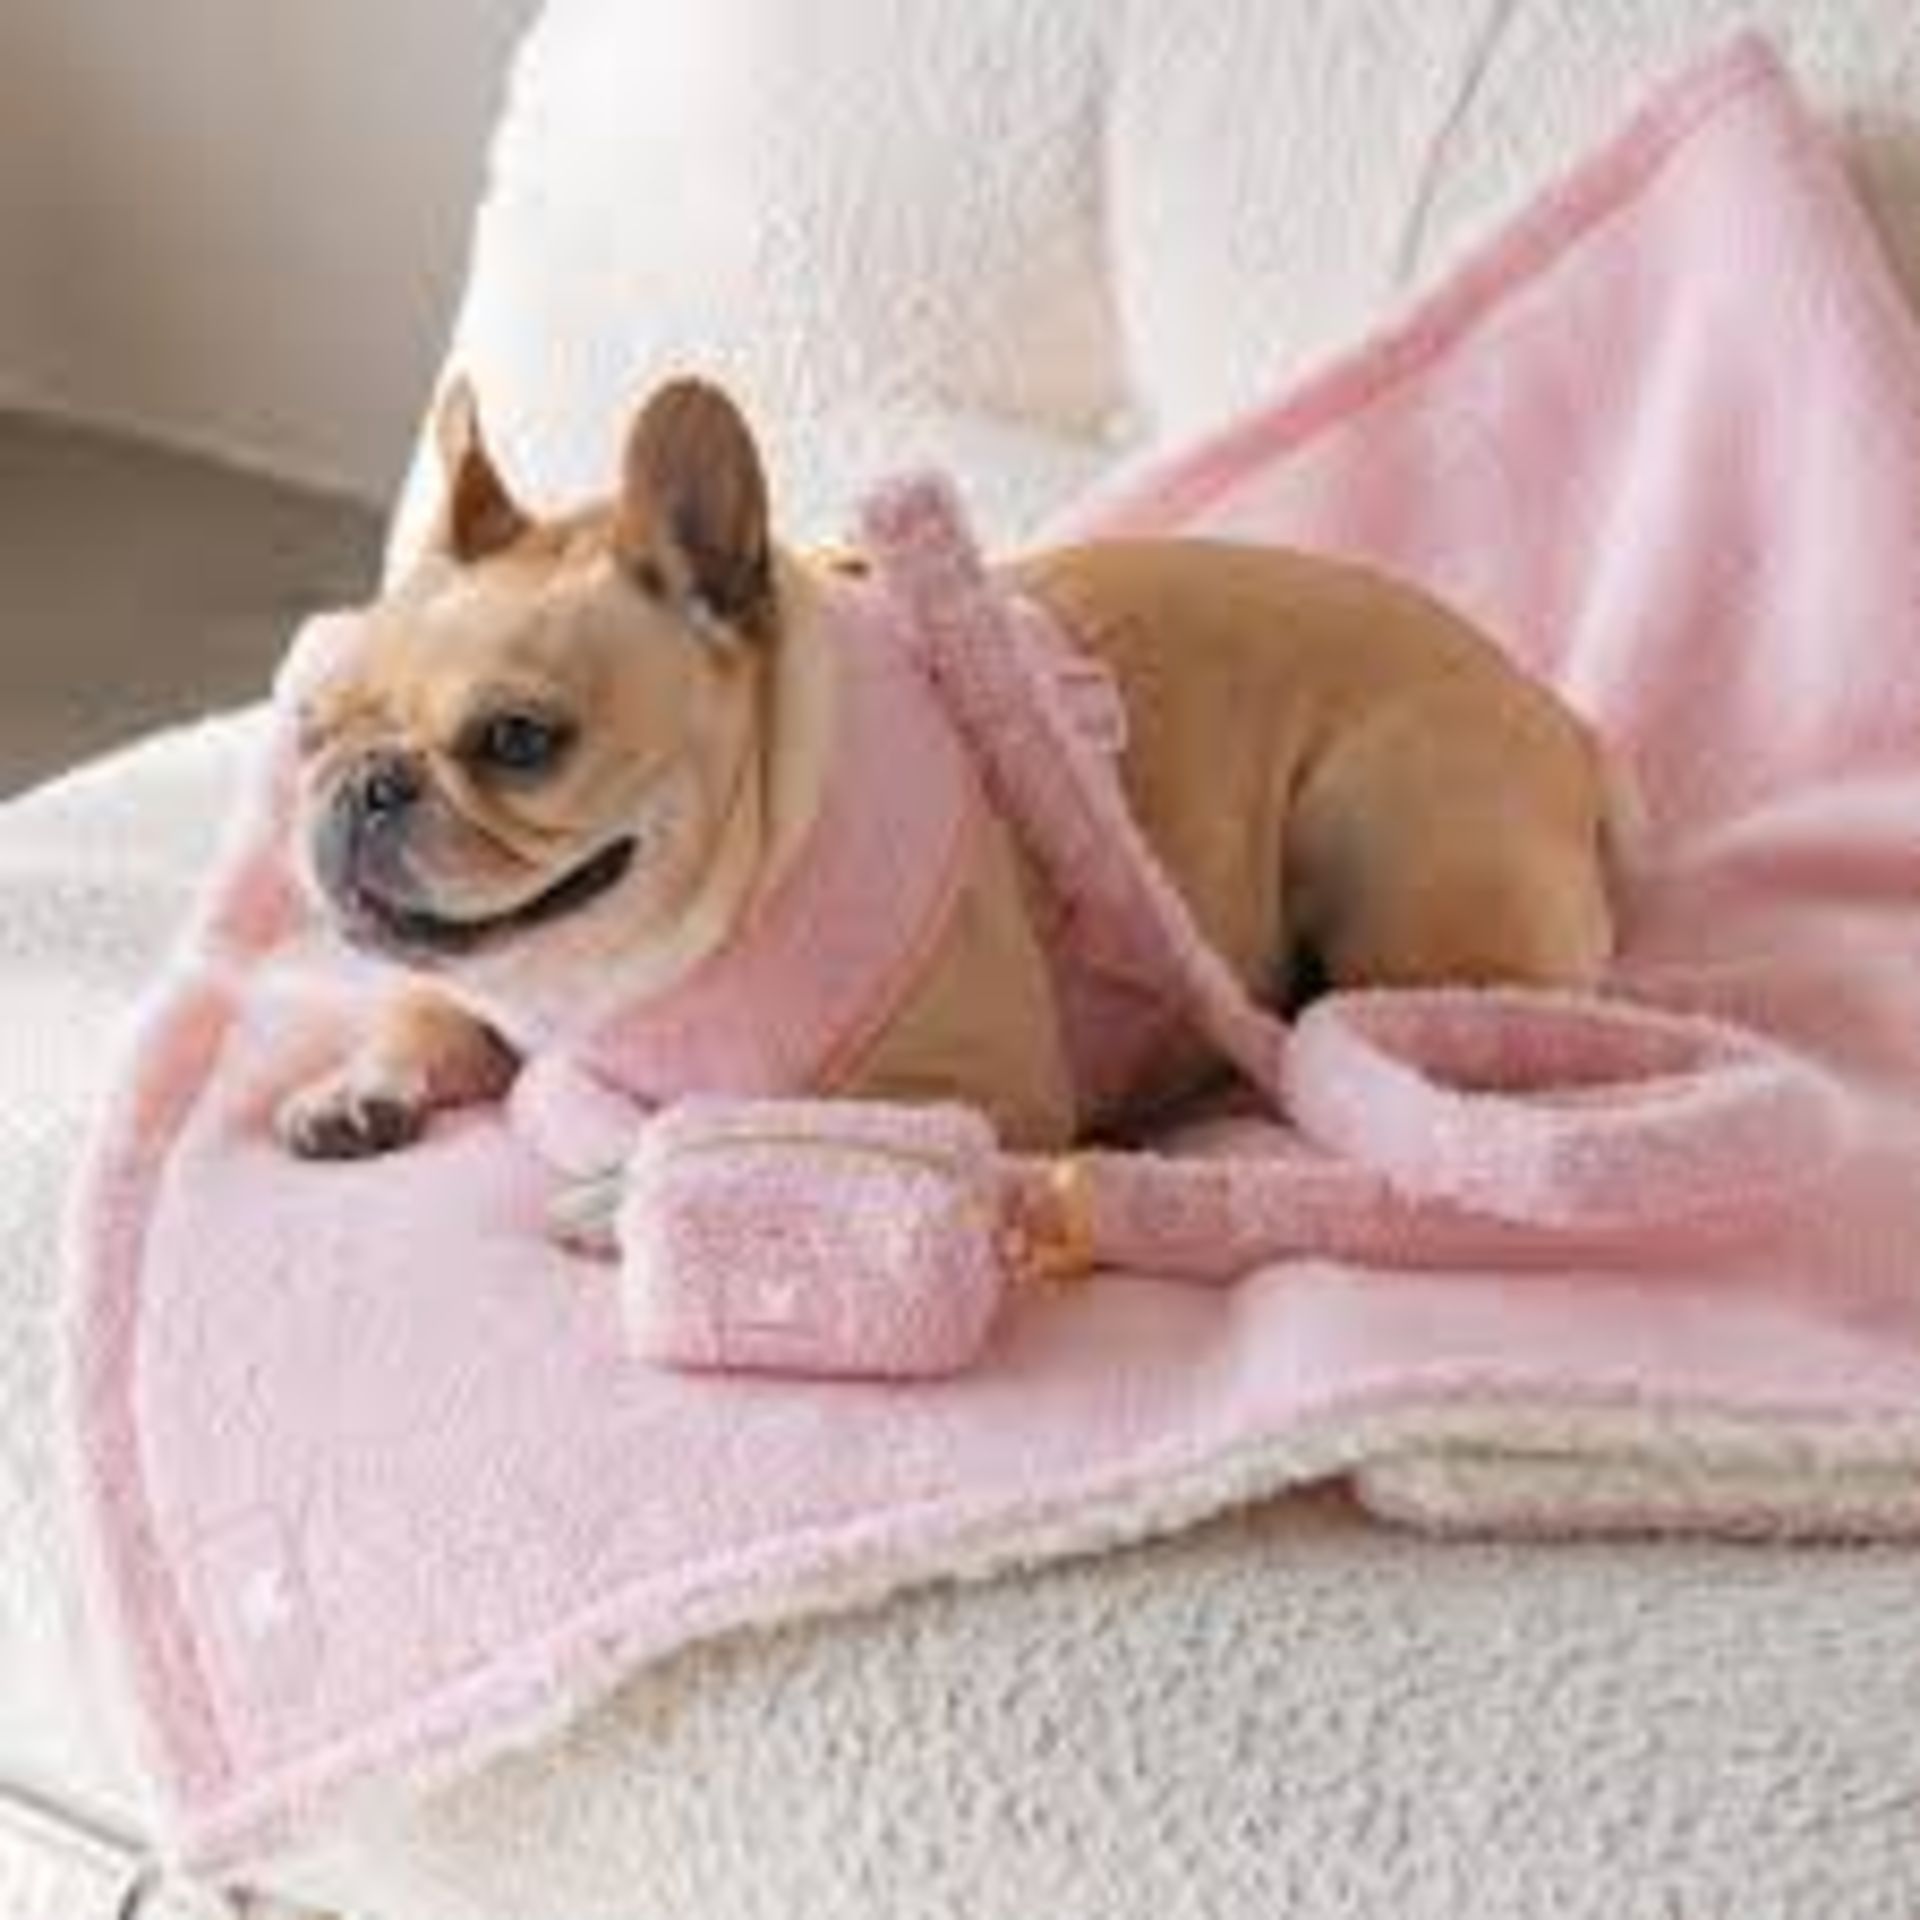 Trade Lot 100 X New .Packaged Frenchie The Bulldog Luxury Branded Dog Products. May include items - Image 27 of 50